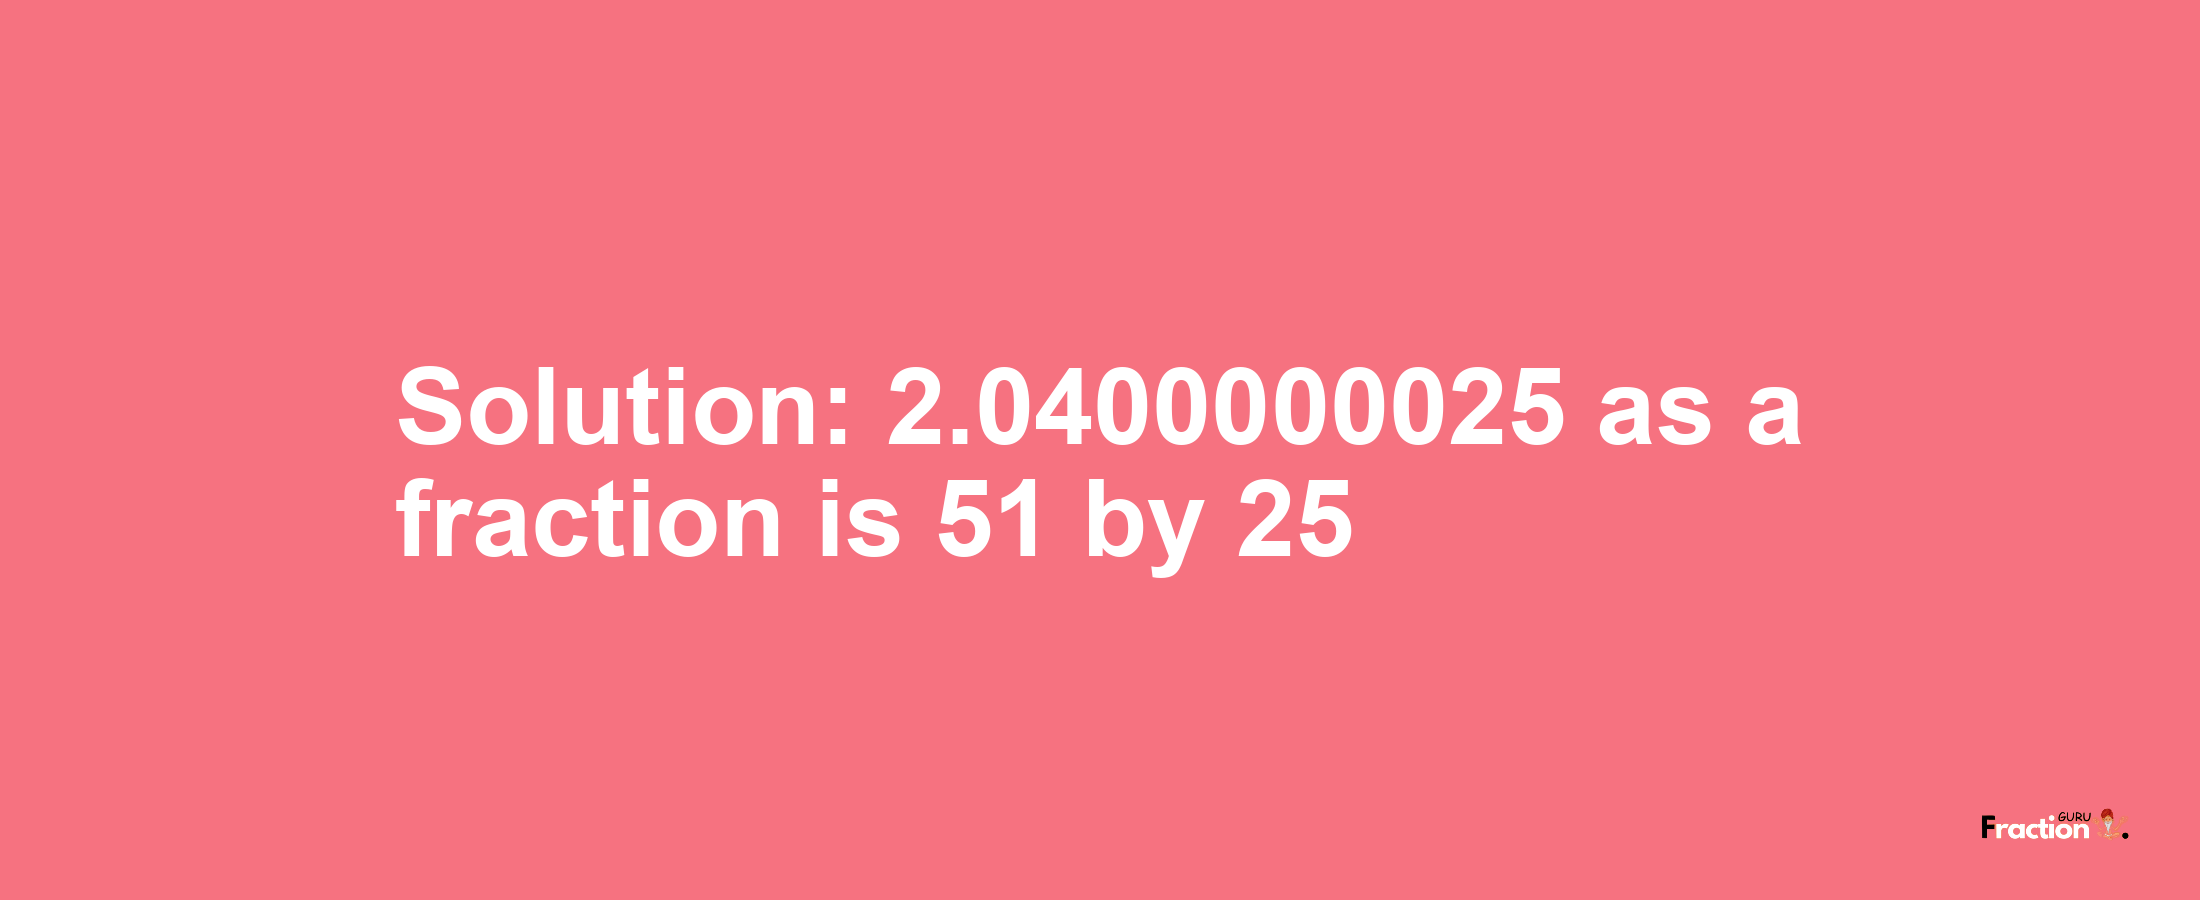 Solution:2.0400000025 as a fraction is 51/25